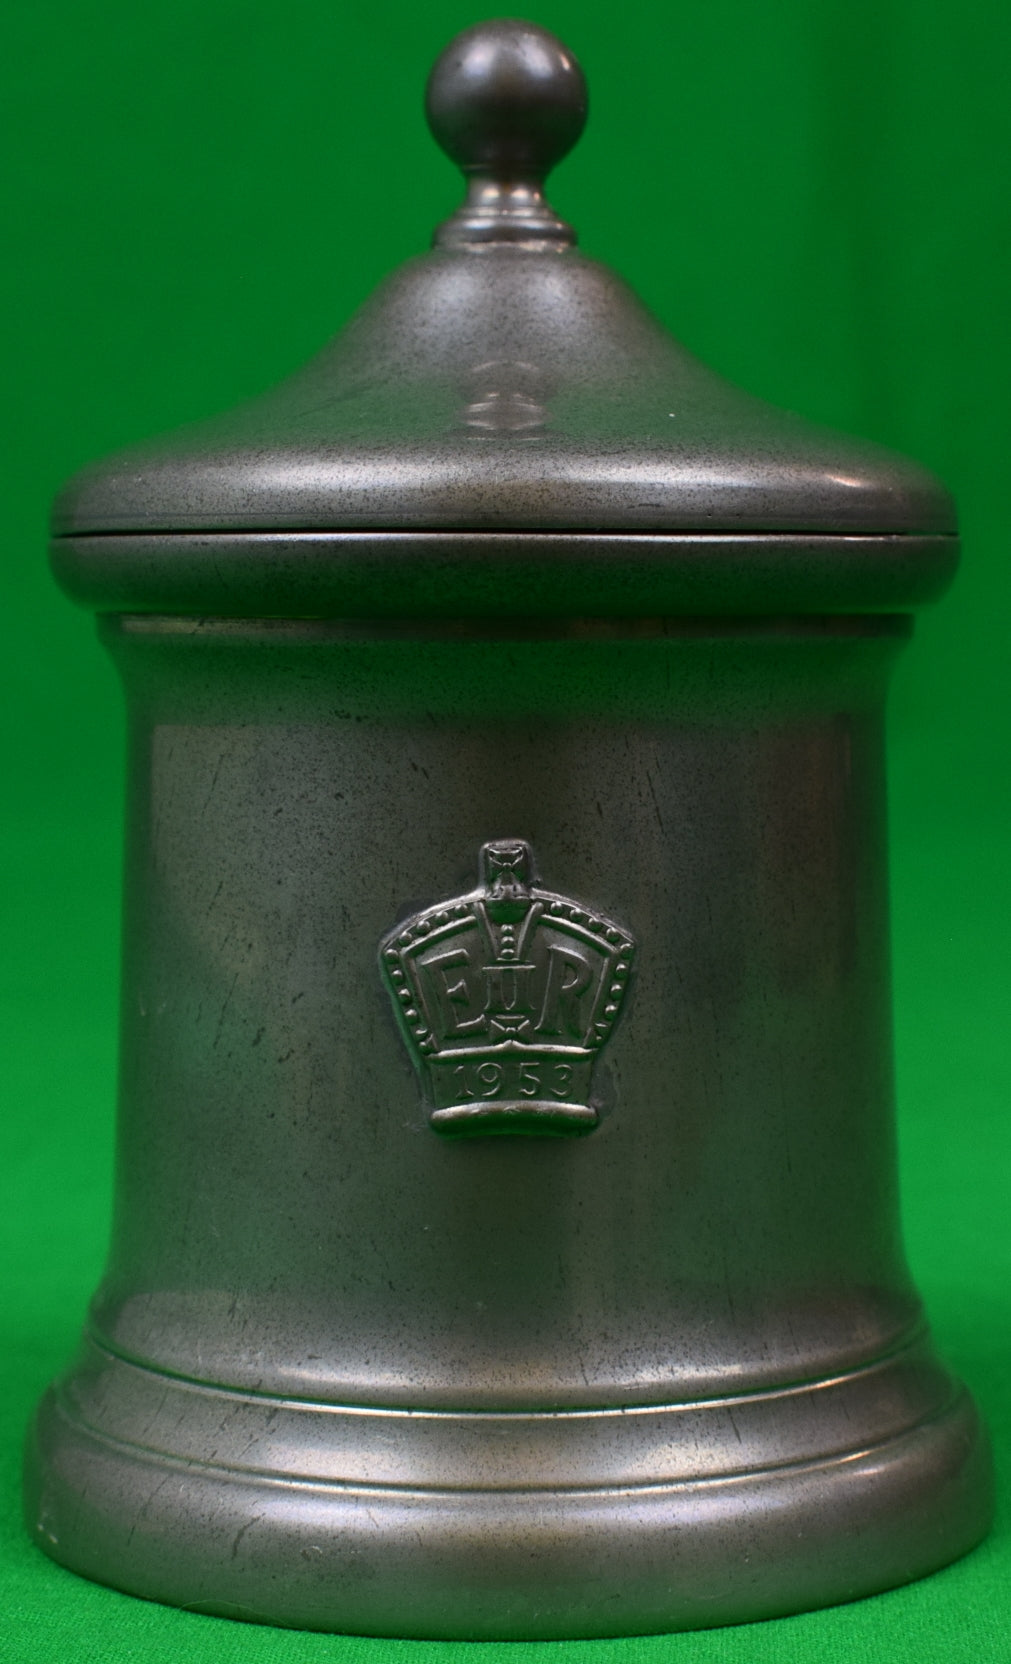 "Abercrombie & Fitch 1953 E R Coronation Pewter Tea Caddy Canister"